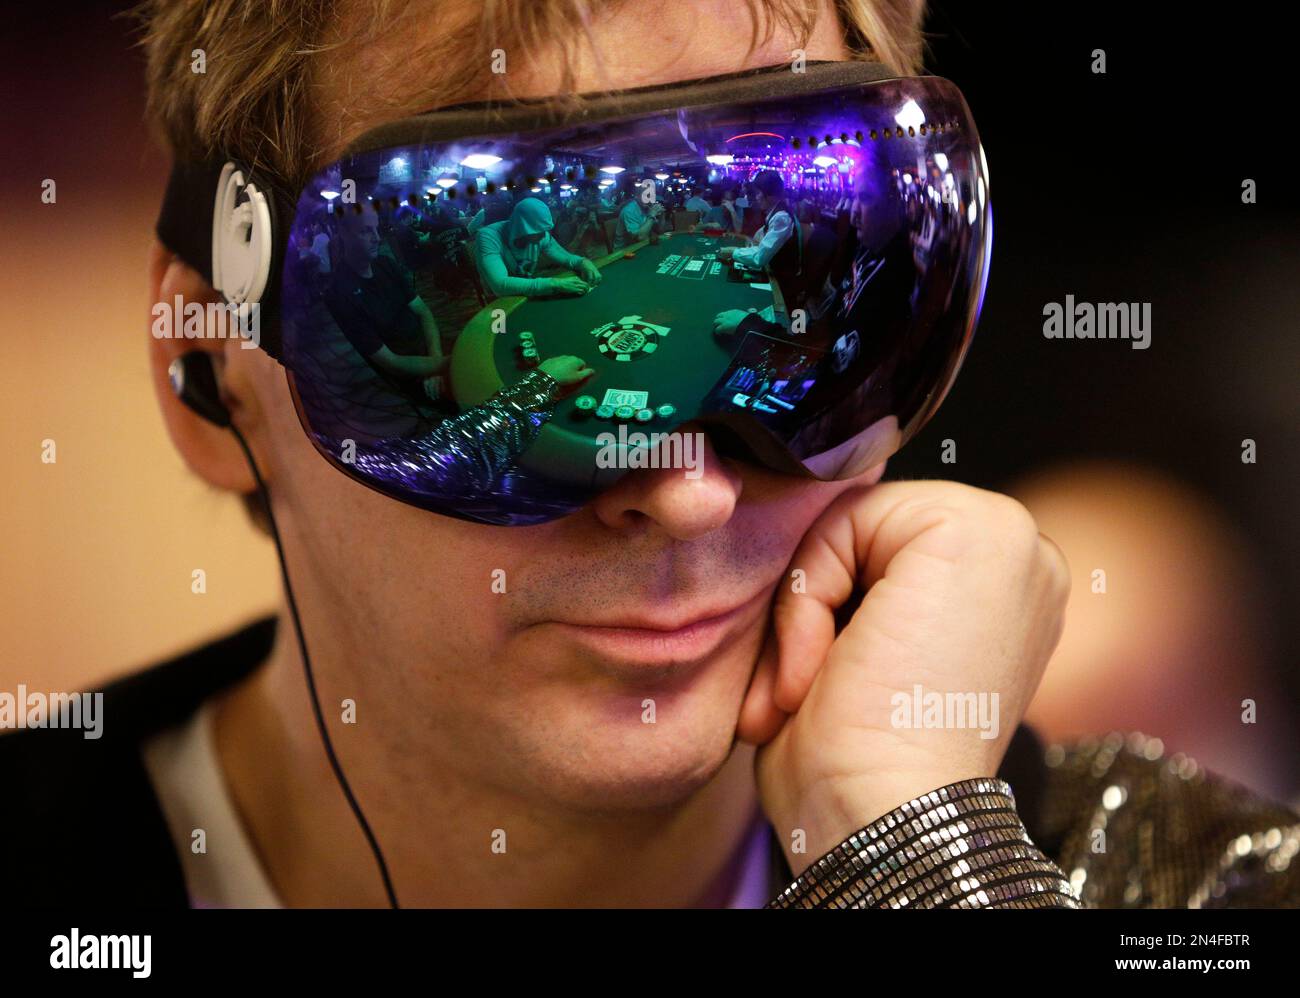 Phil Laak wears goggles while he plays on the first day of the World Series of Poker main event Saturday, July 5, 2014, in Las Vegas. Players will be vying for the $10 million first-place payout at the poker tournament. (AP Photo/John Locher) Stock Photo